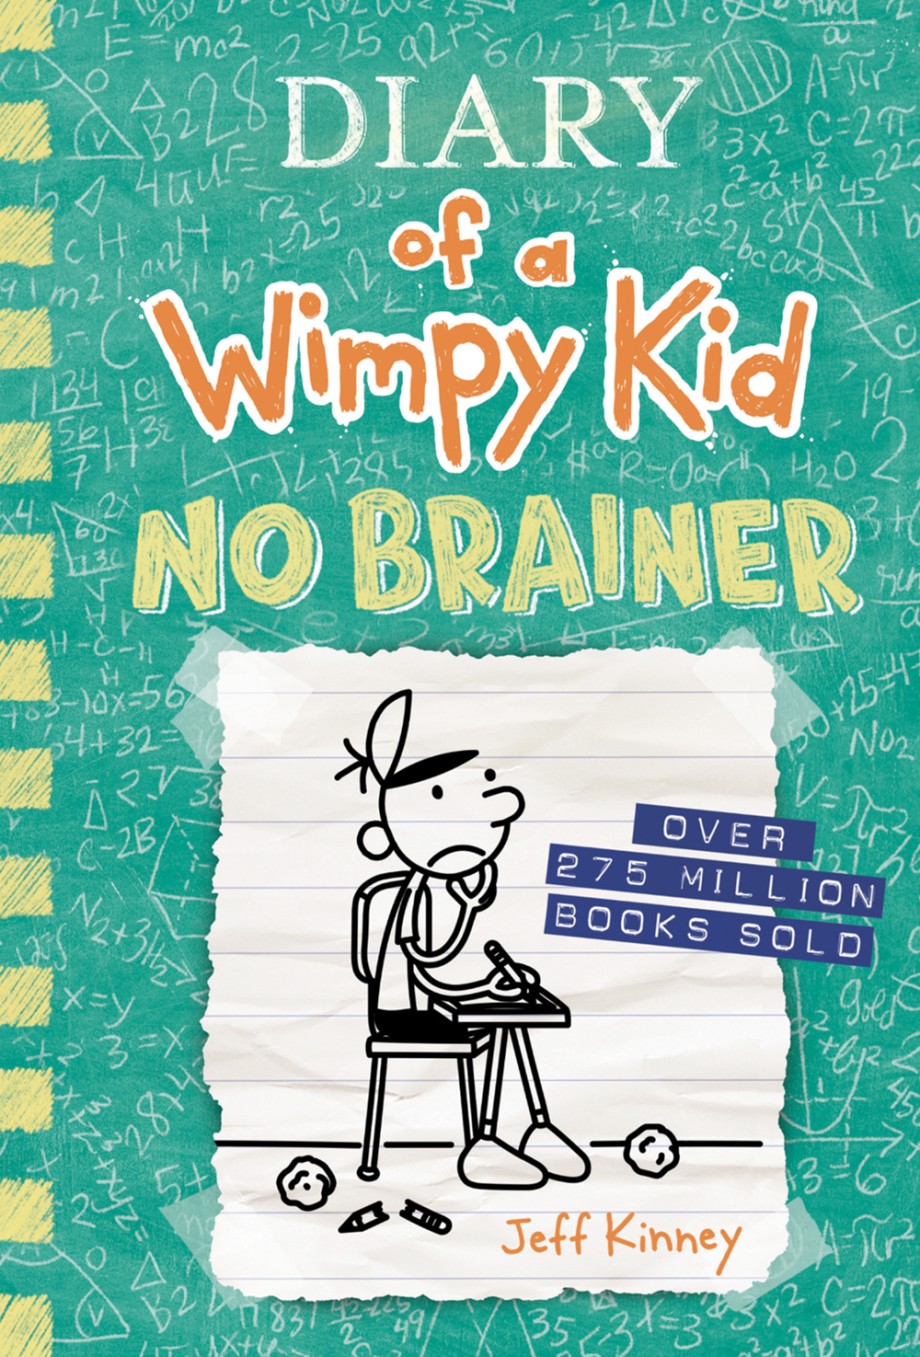 No Brainer (Diary of a Wimpy Kid Book 18) (Hardcover) ABRAMS